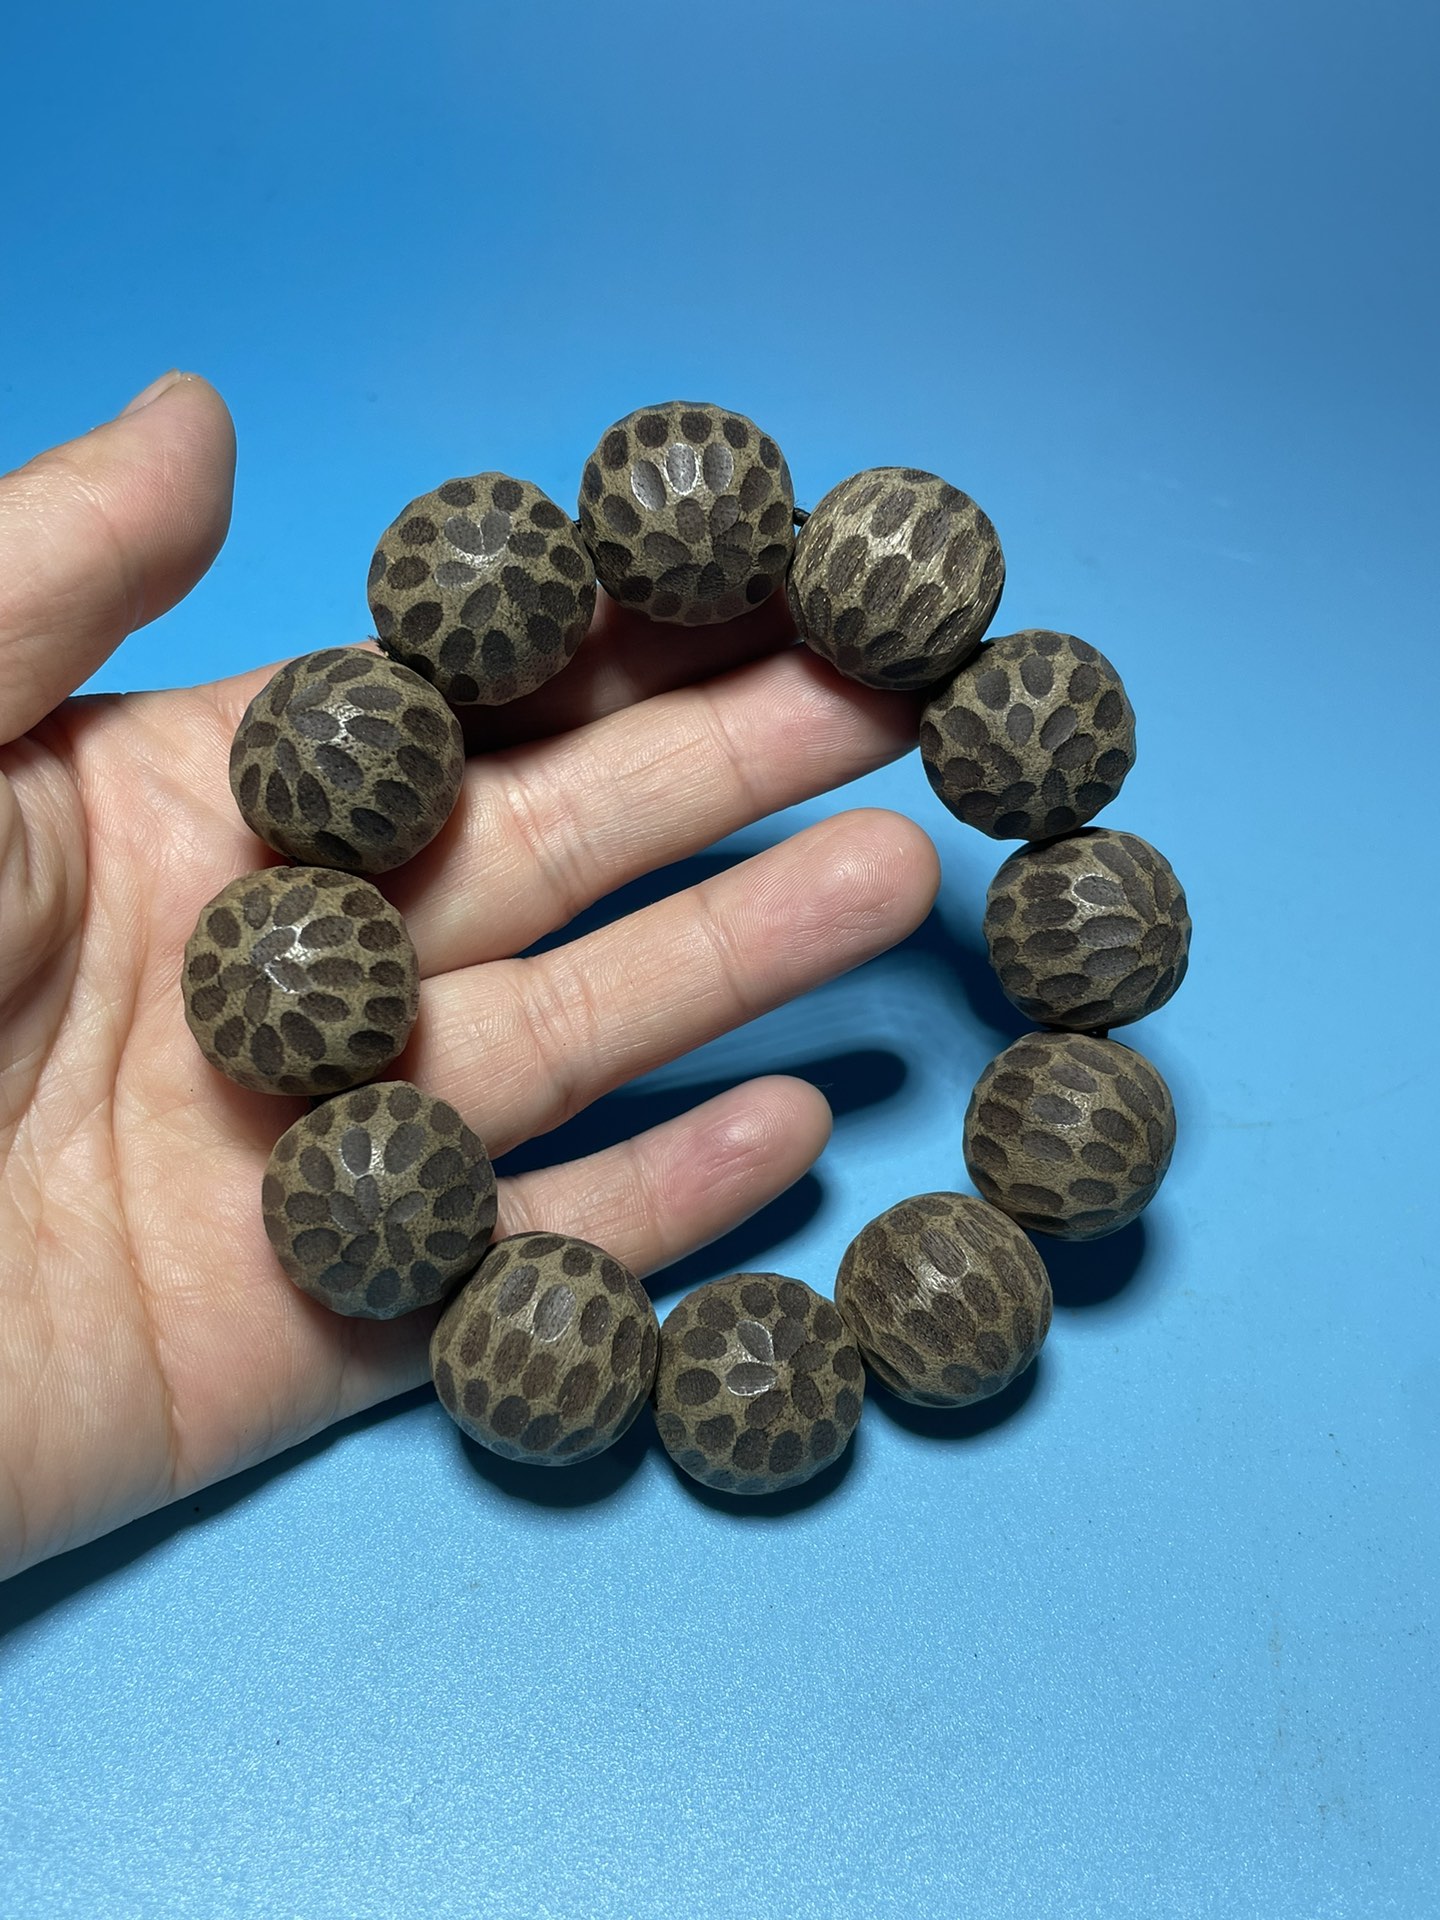 Exquisite collection of old material agarwood bracelets - Image 5 of 8